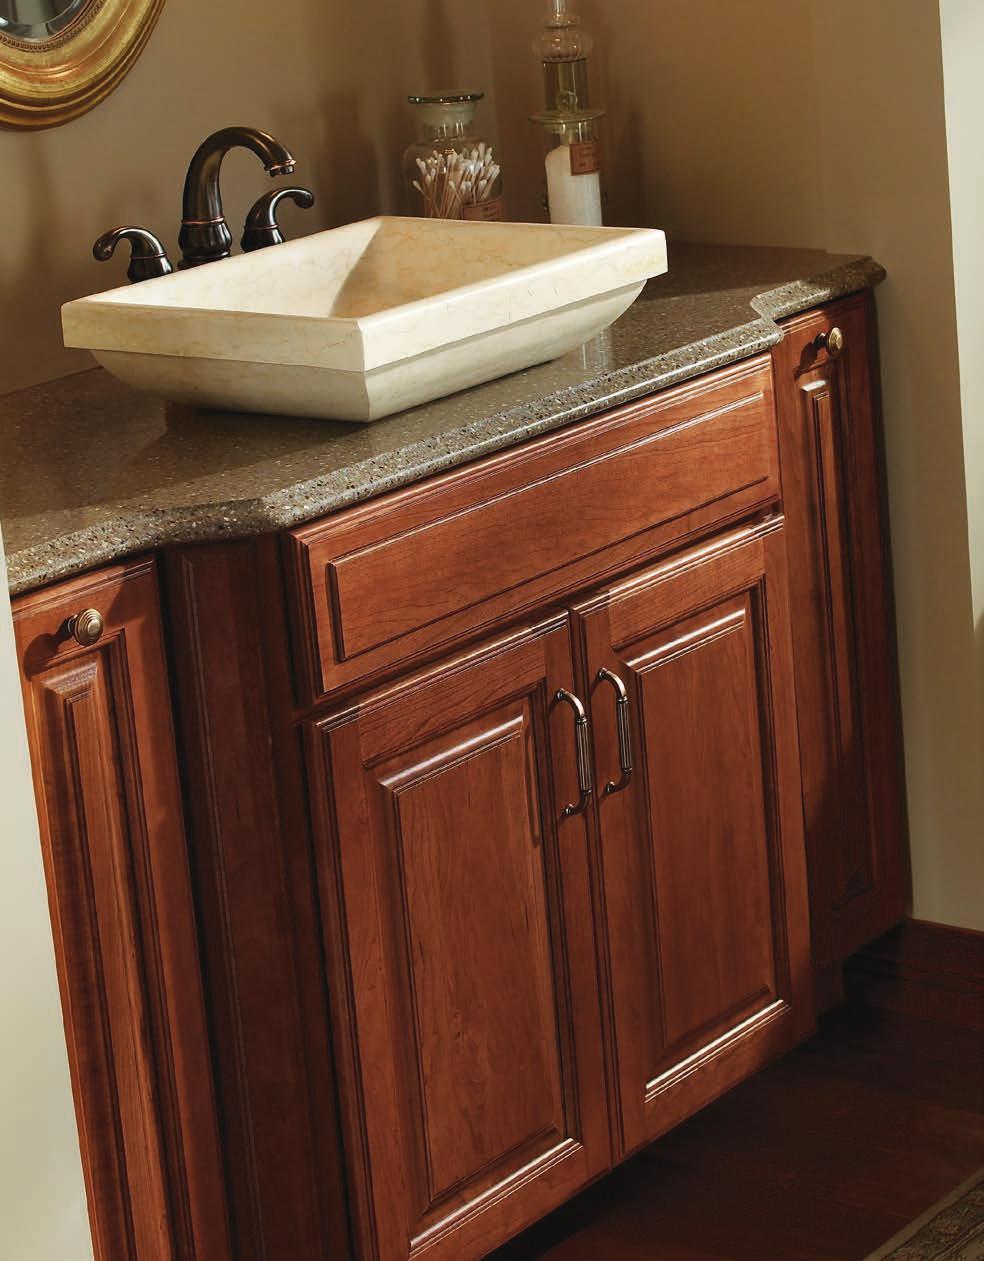 Optional five-piece drawer front construction is available for added detail and dimension.